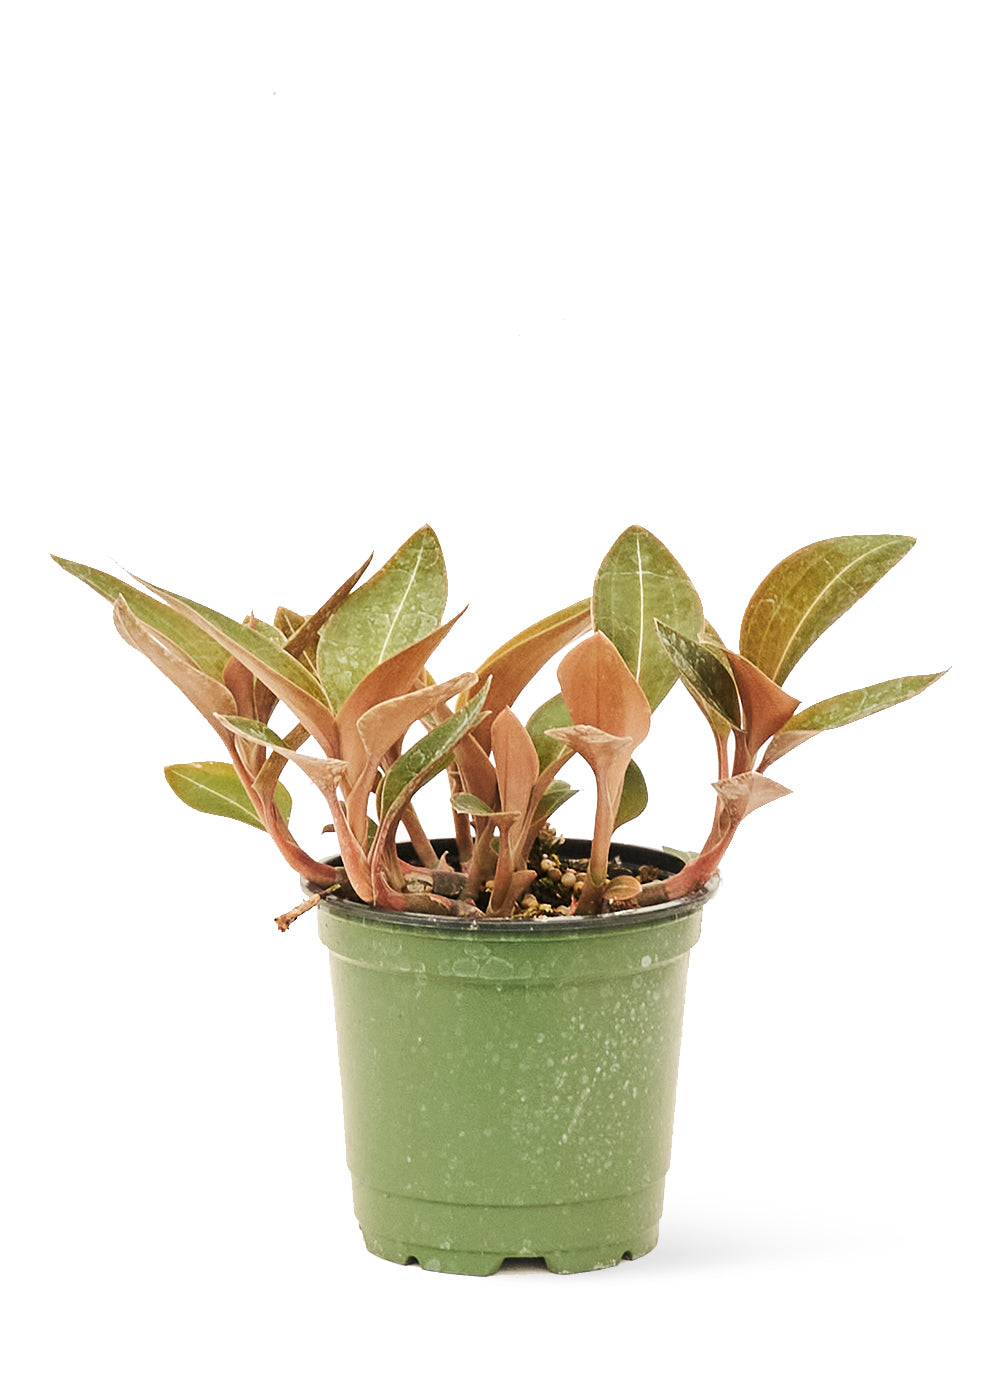 Jewel Orchid 'Discolor', Small